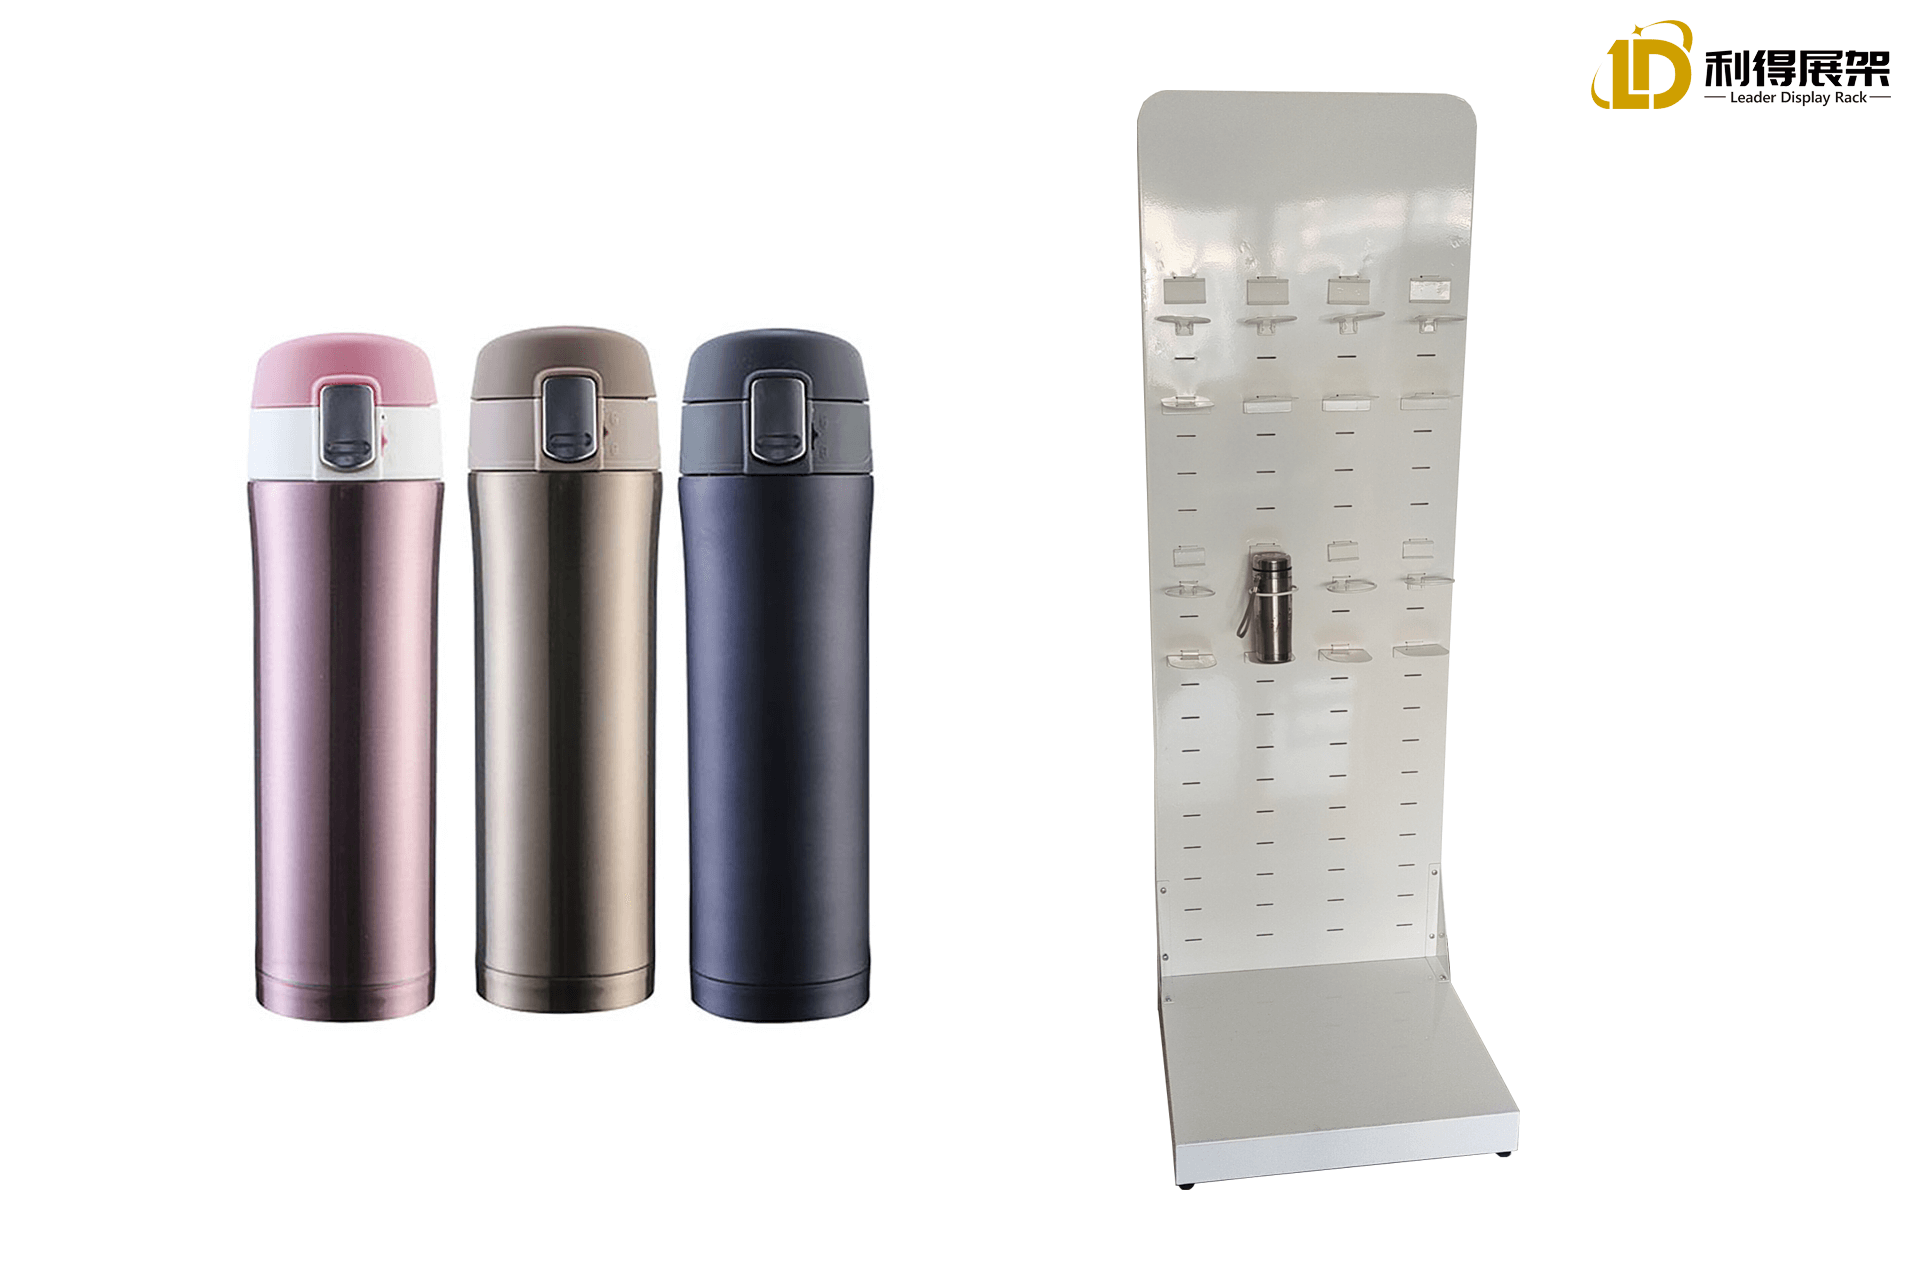 Thermos cup display stand